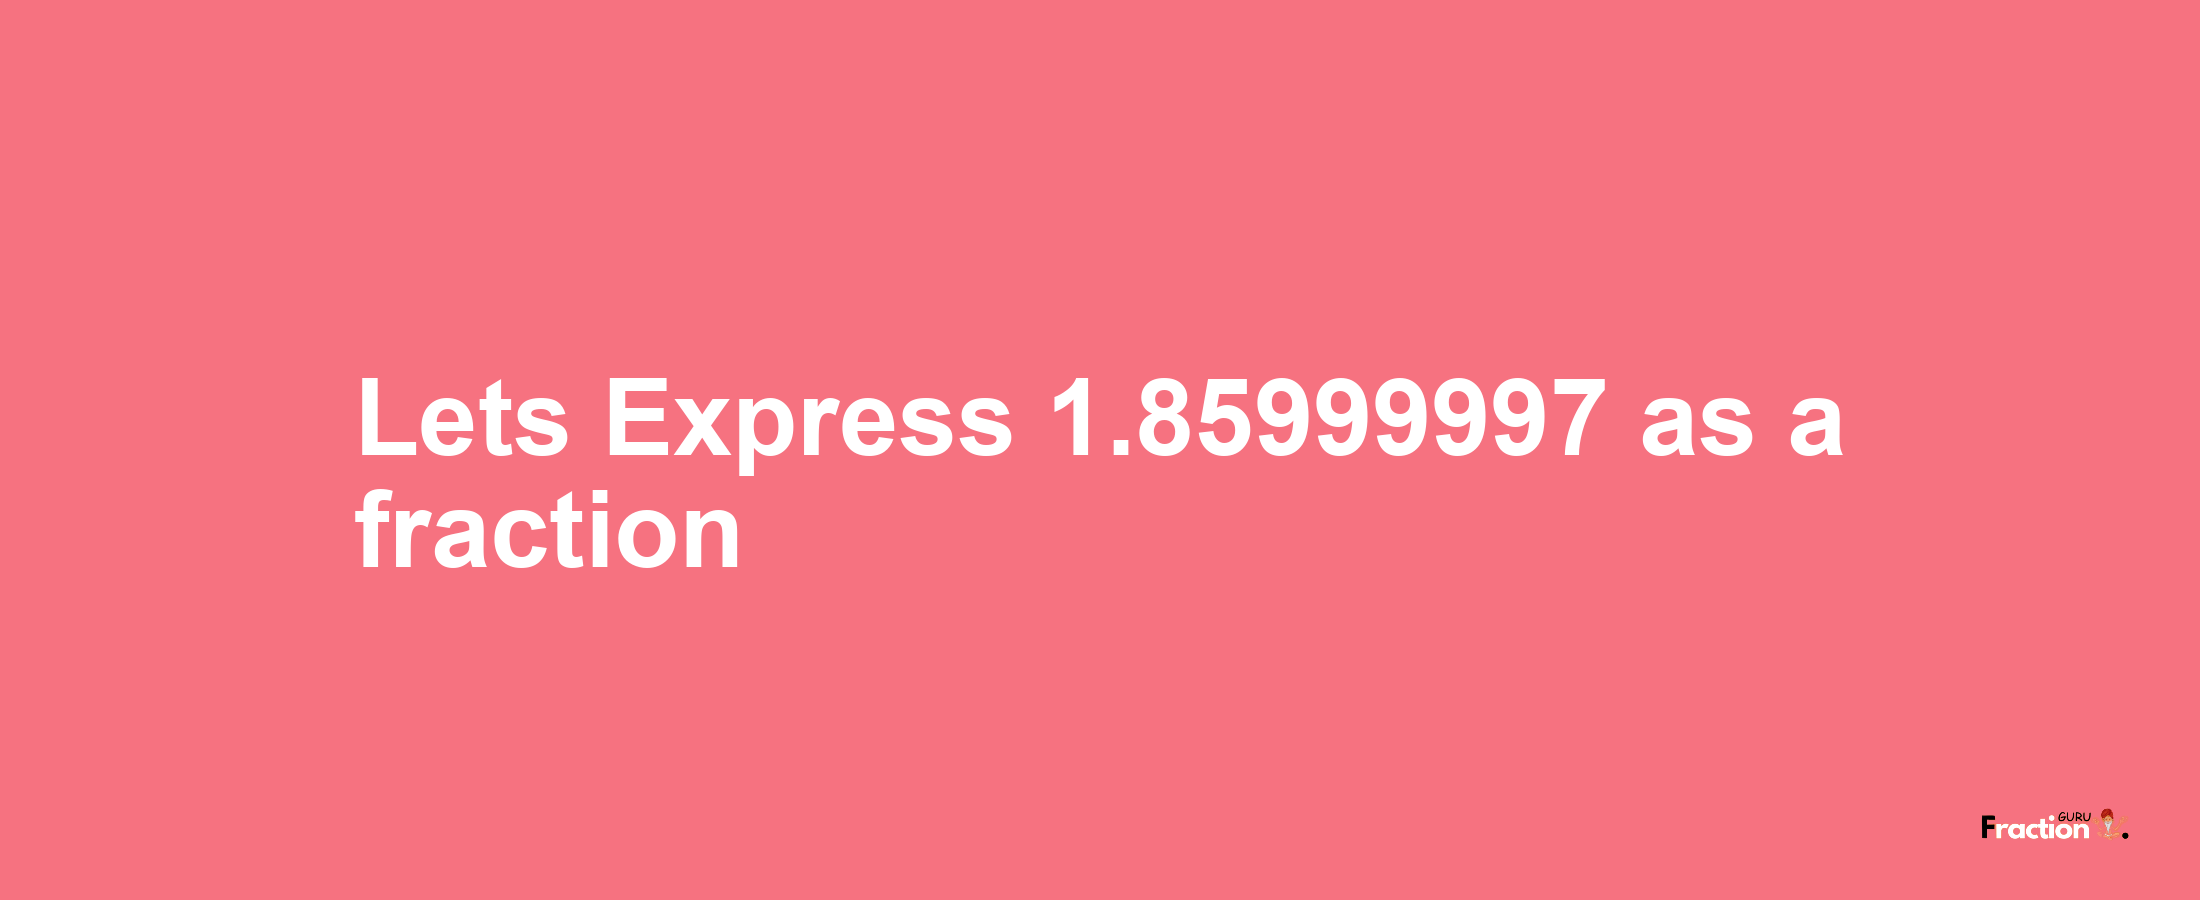 Lets Express 1.85999997 as afraction